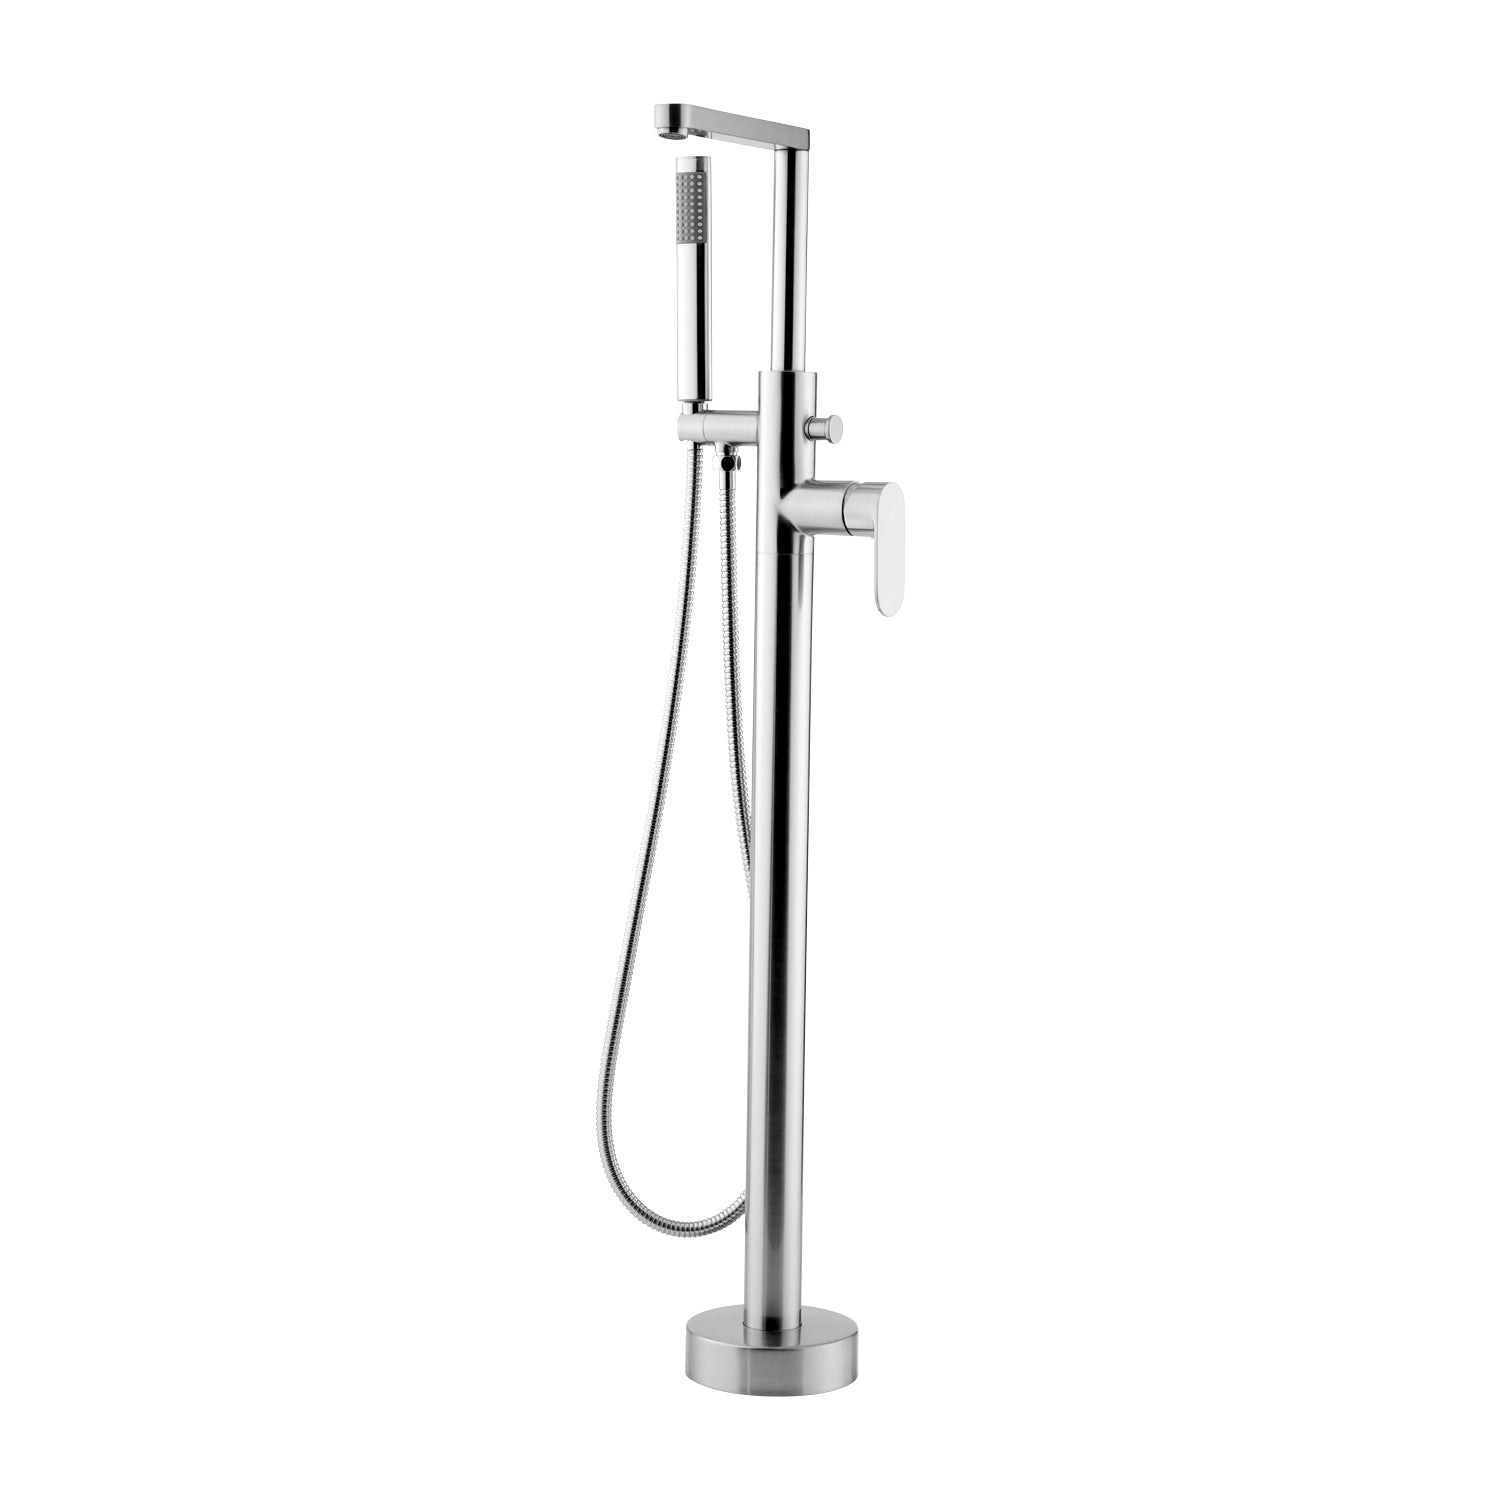 DAX Freestanding Hot Tub Filler with Hand Shower and Square Spout, Stainless Steel Body, Brushed Finish, 40-1/2 x 8-1/2 Inches (DAX-808-BN)